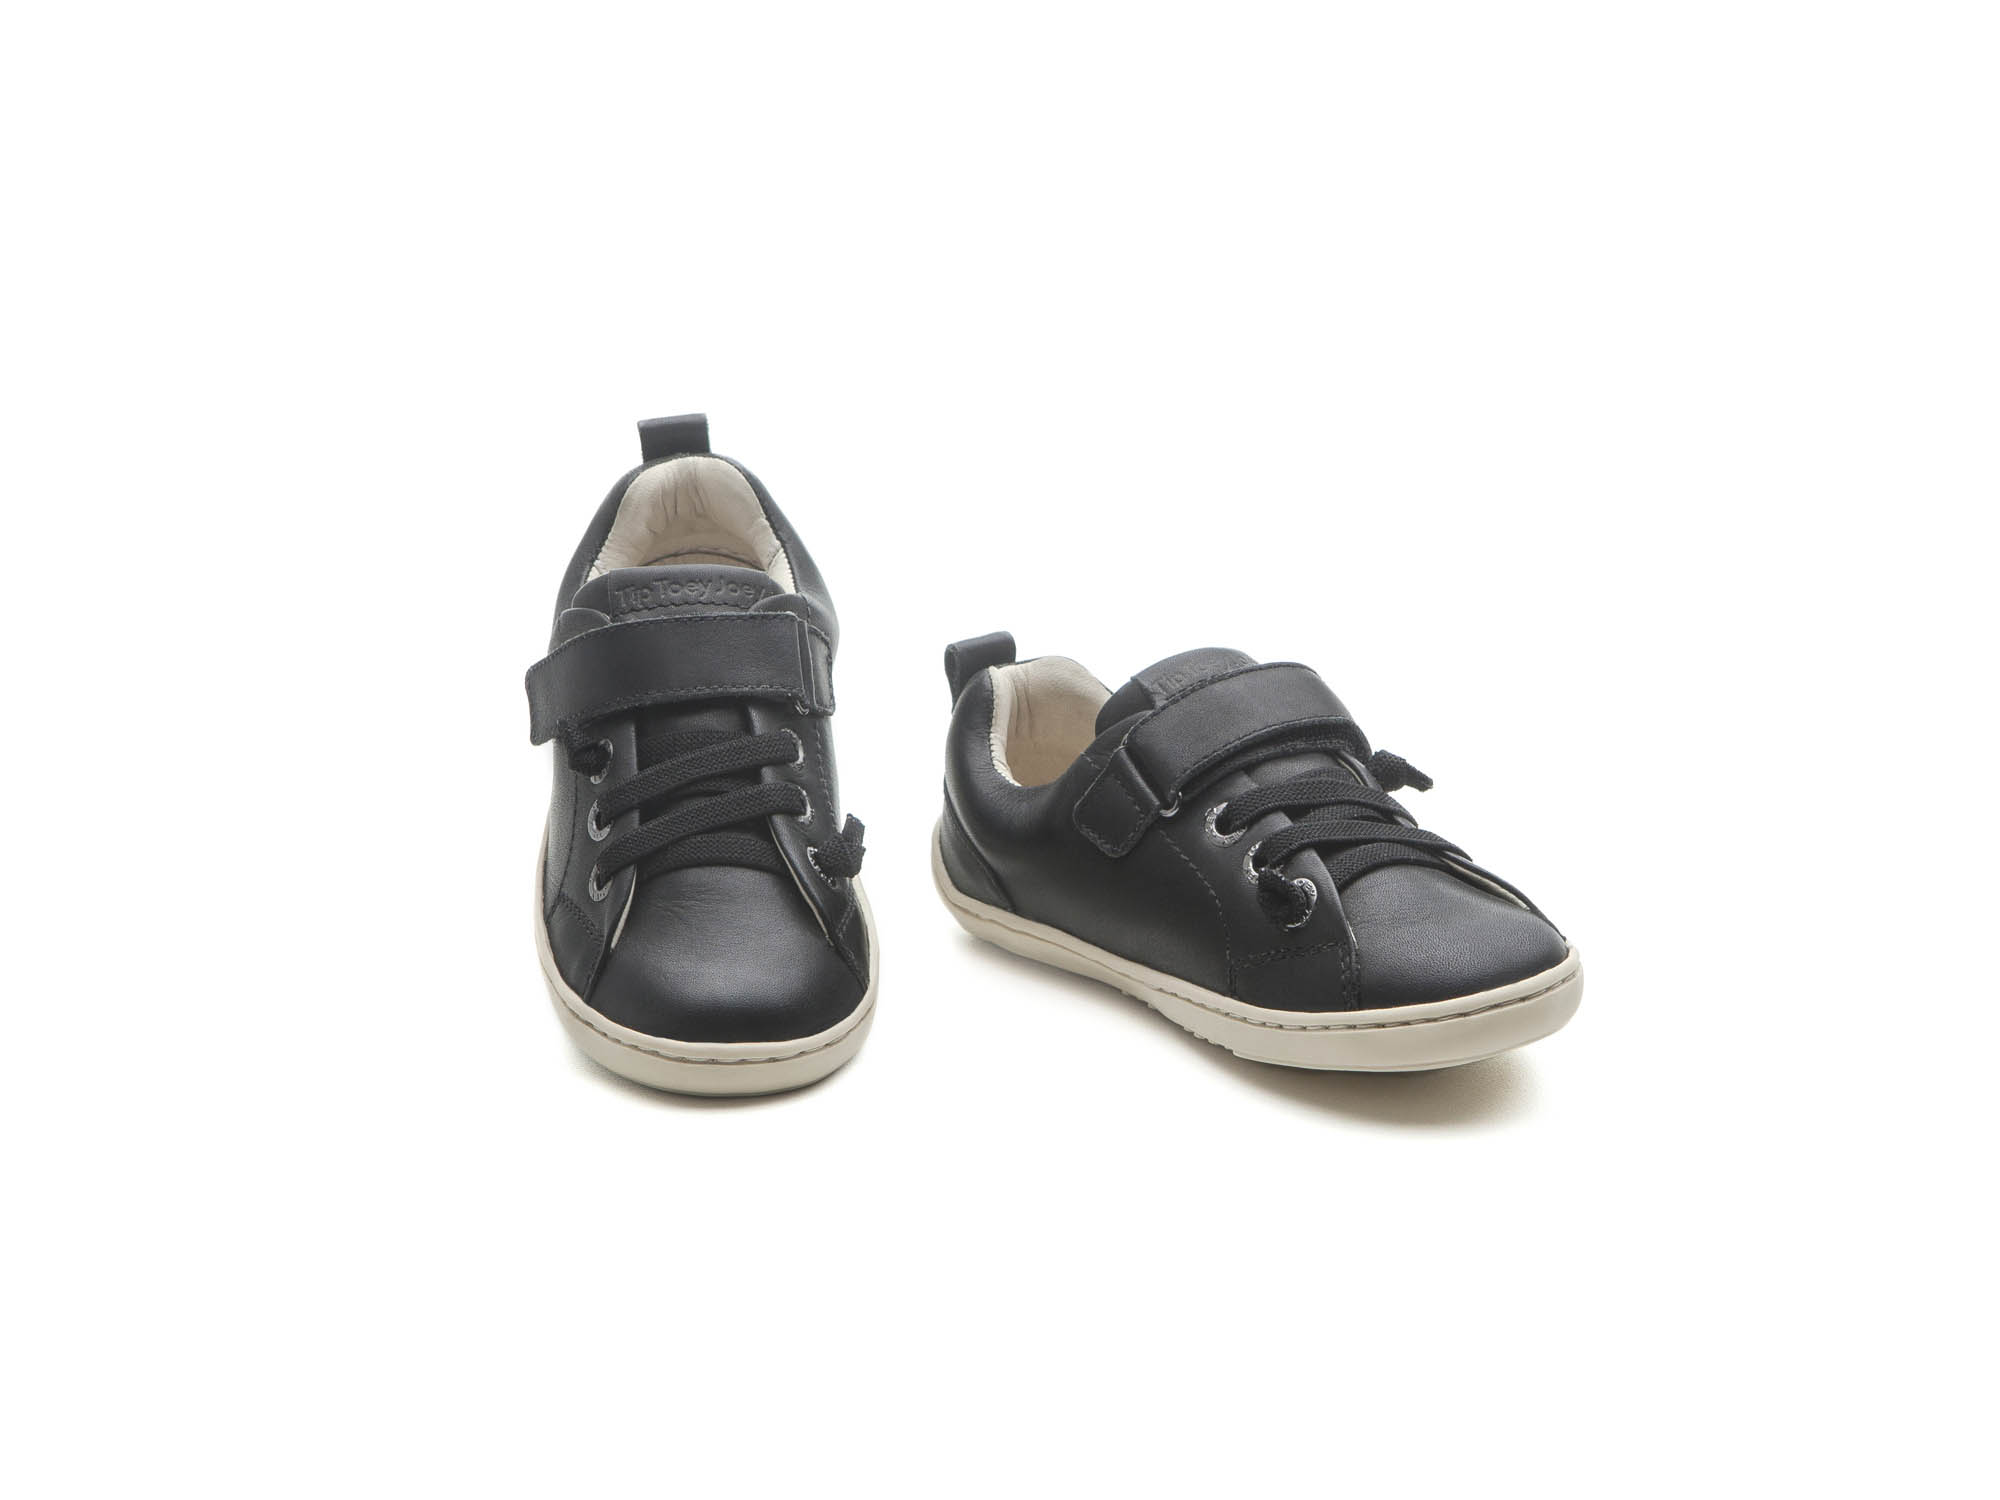 UP & GO Casual for Boys Little Grao | Tip Toey Joey - Australia - 1